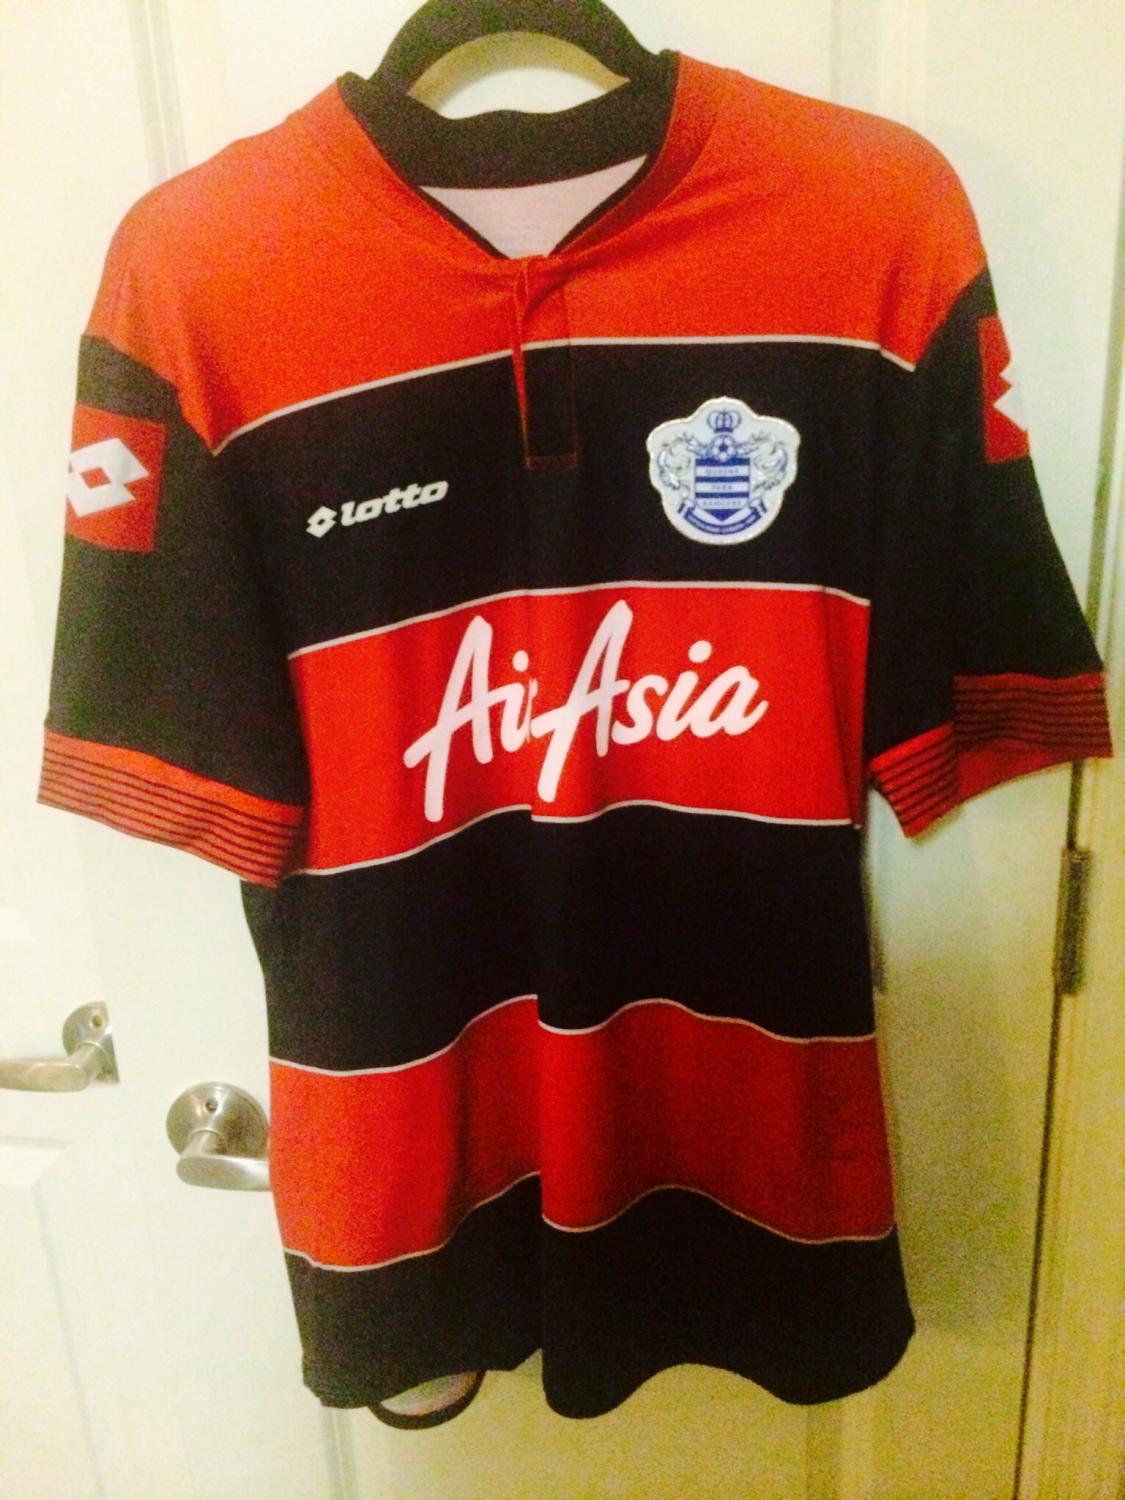 Queens Park Rangers Maillot Home taille S/M/XXL Air Asia Lotto 13-14 Jersey QPR 